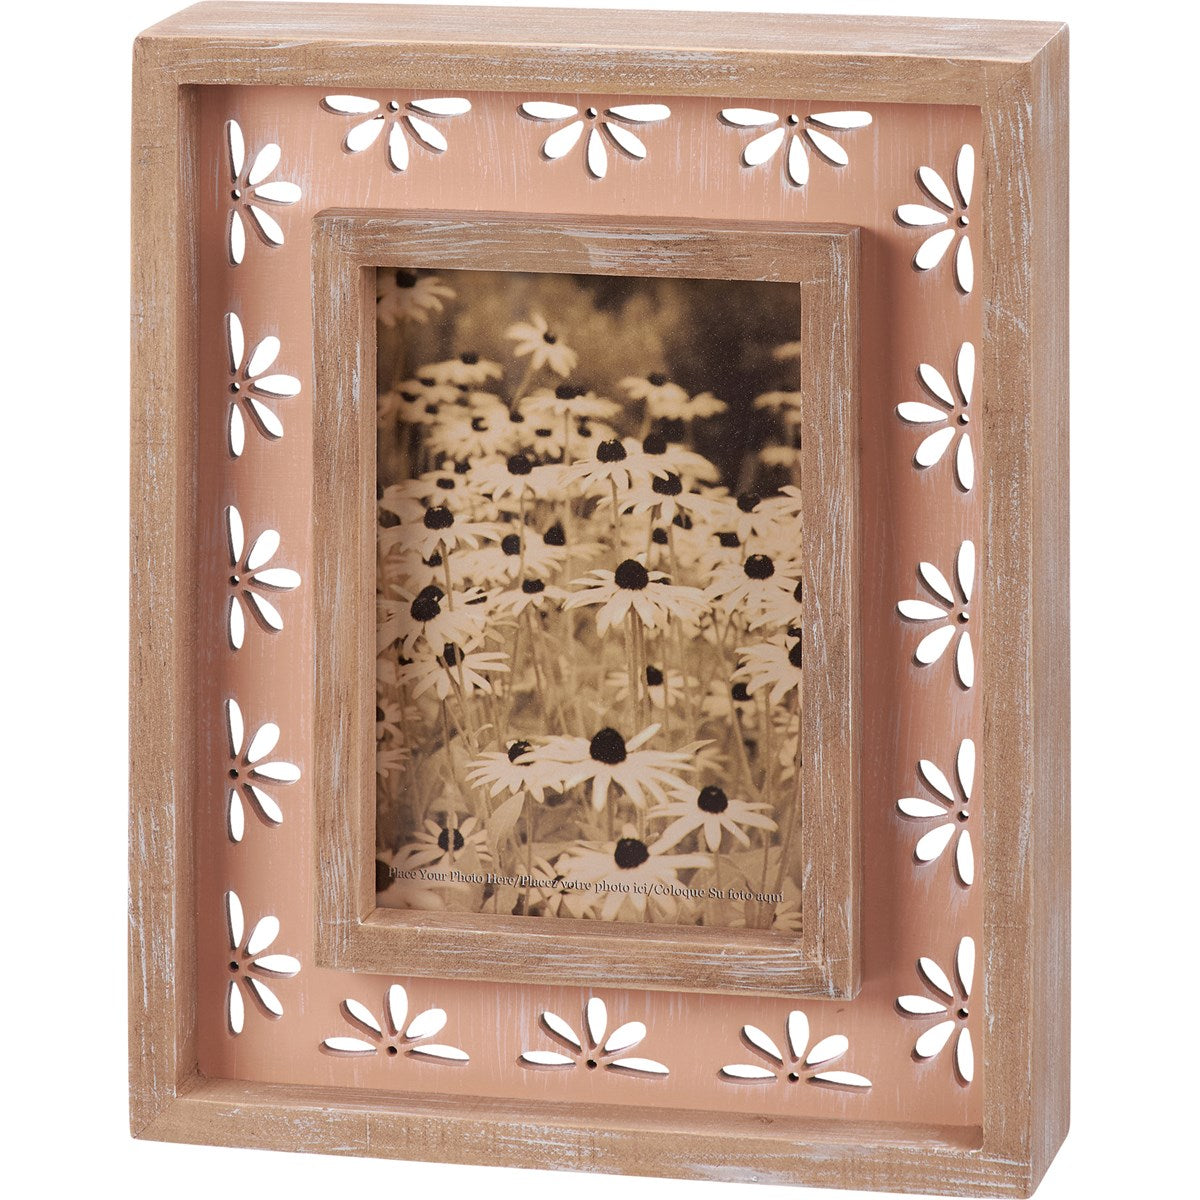 Flowers Inset Box Frame-Home Décor-Primitives By Kathy-Market Street Nest, Fashionable Clothing, Shoes and Home Décor Located in Mabank, TX